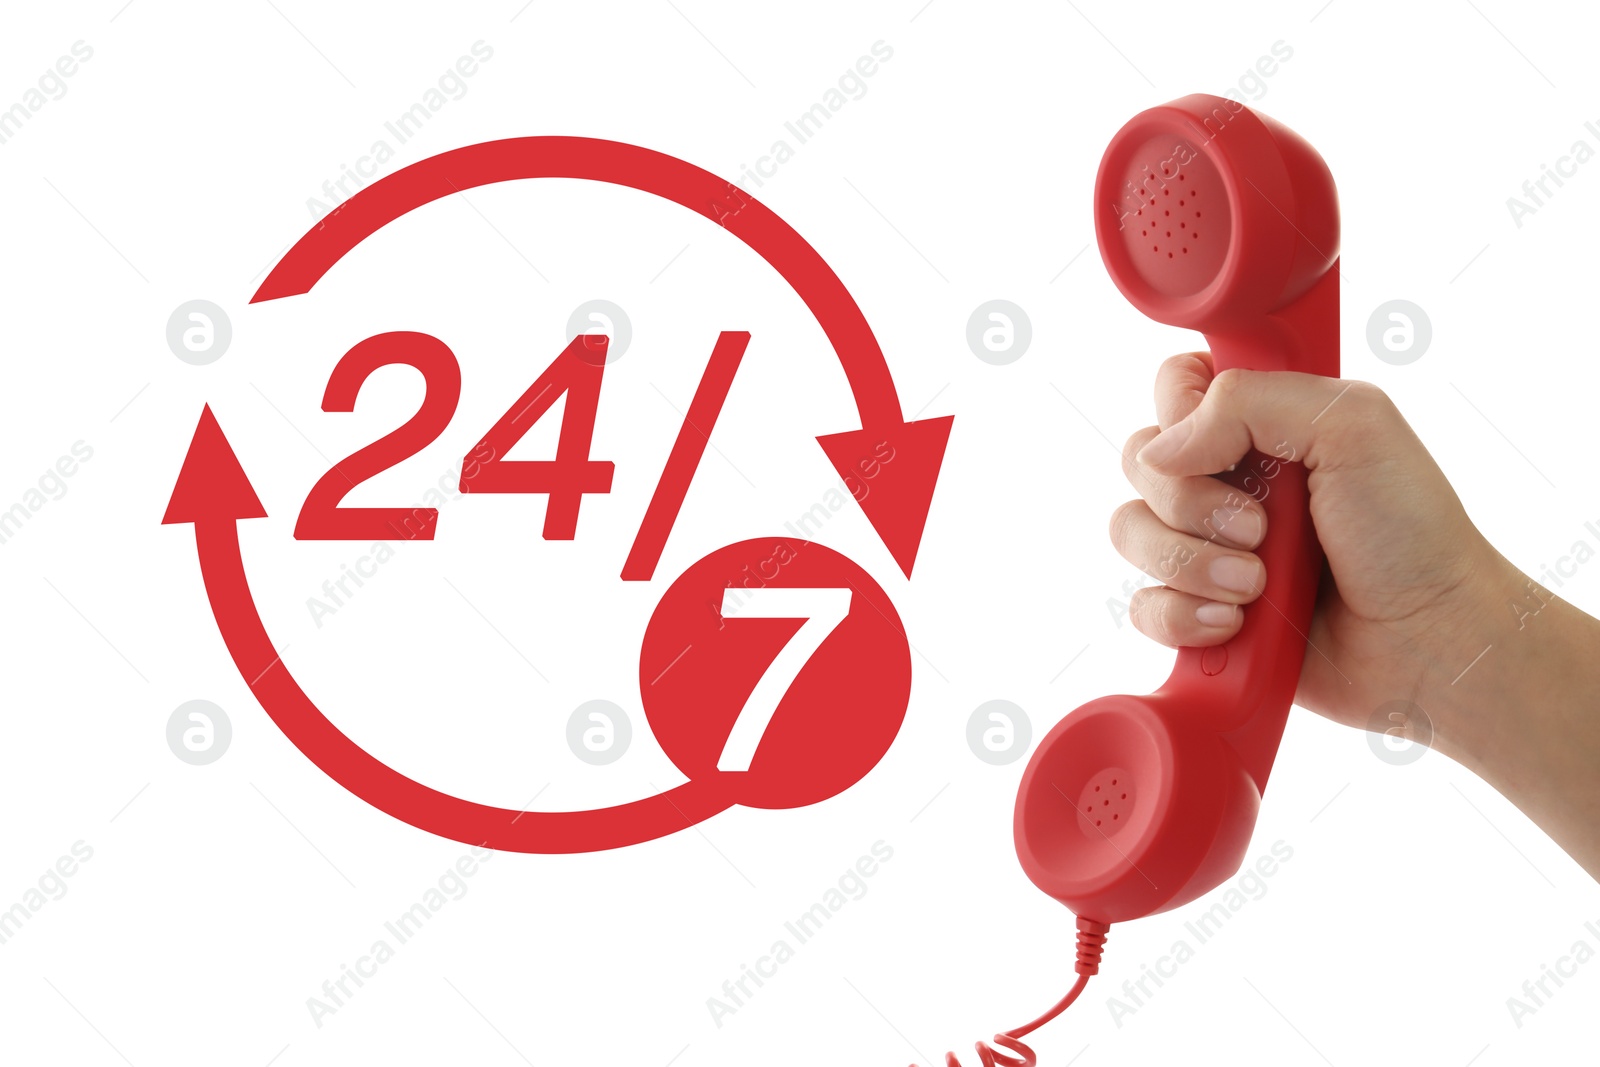 Image of 24/7 hotline service. Woman holding handset on white background, closeup